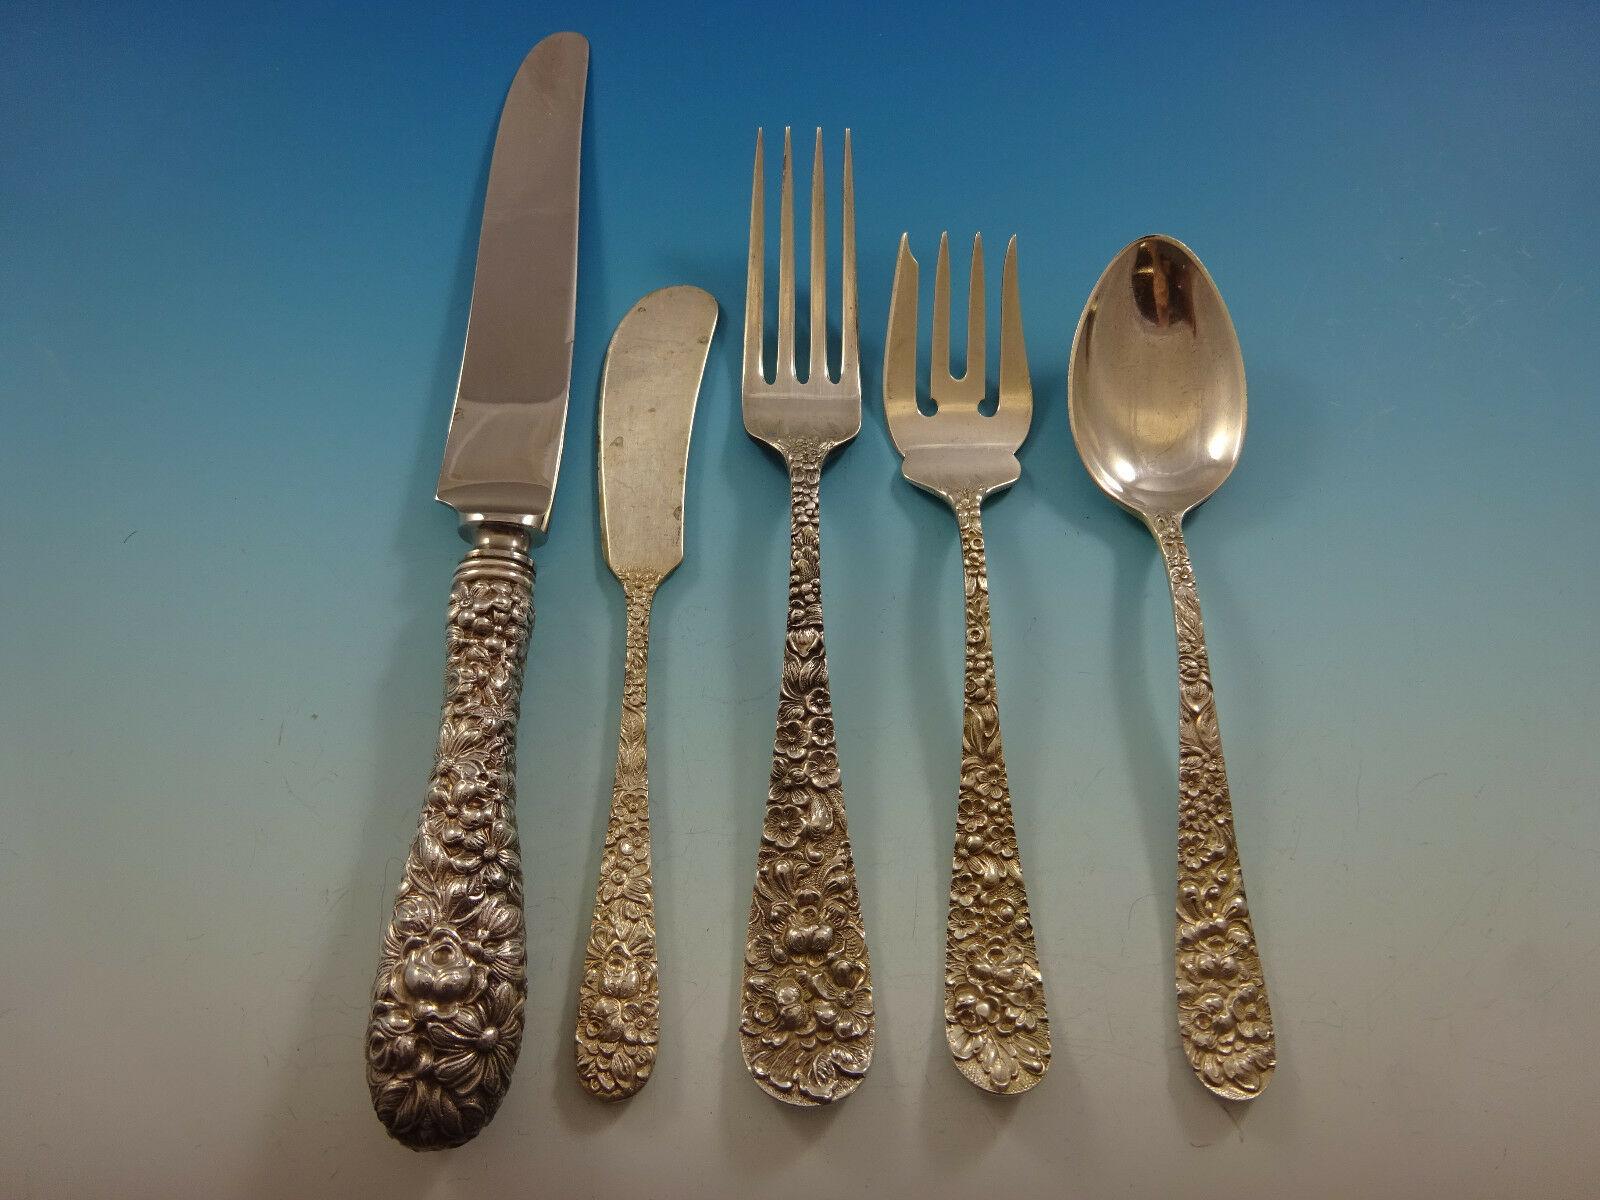 Rose by Stieff repousse sterling silver flatware set - 47 pieces. This set includes:

8 knives, 8 3/4